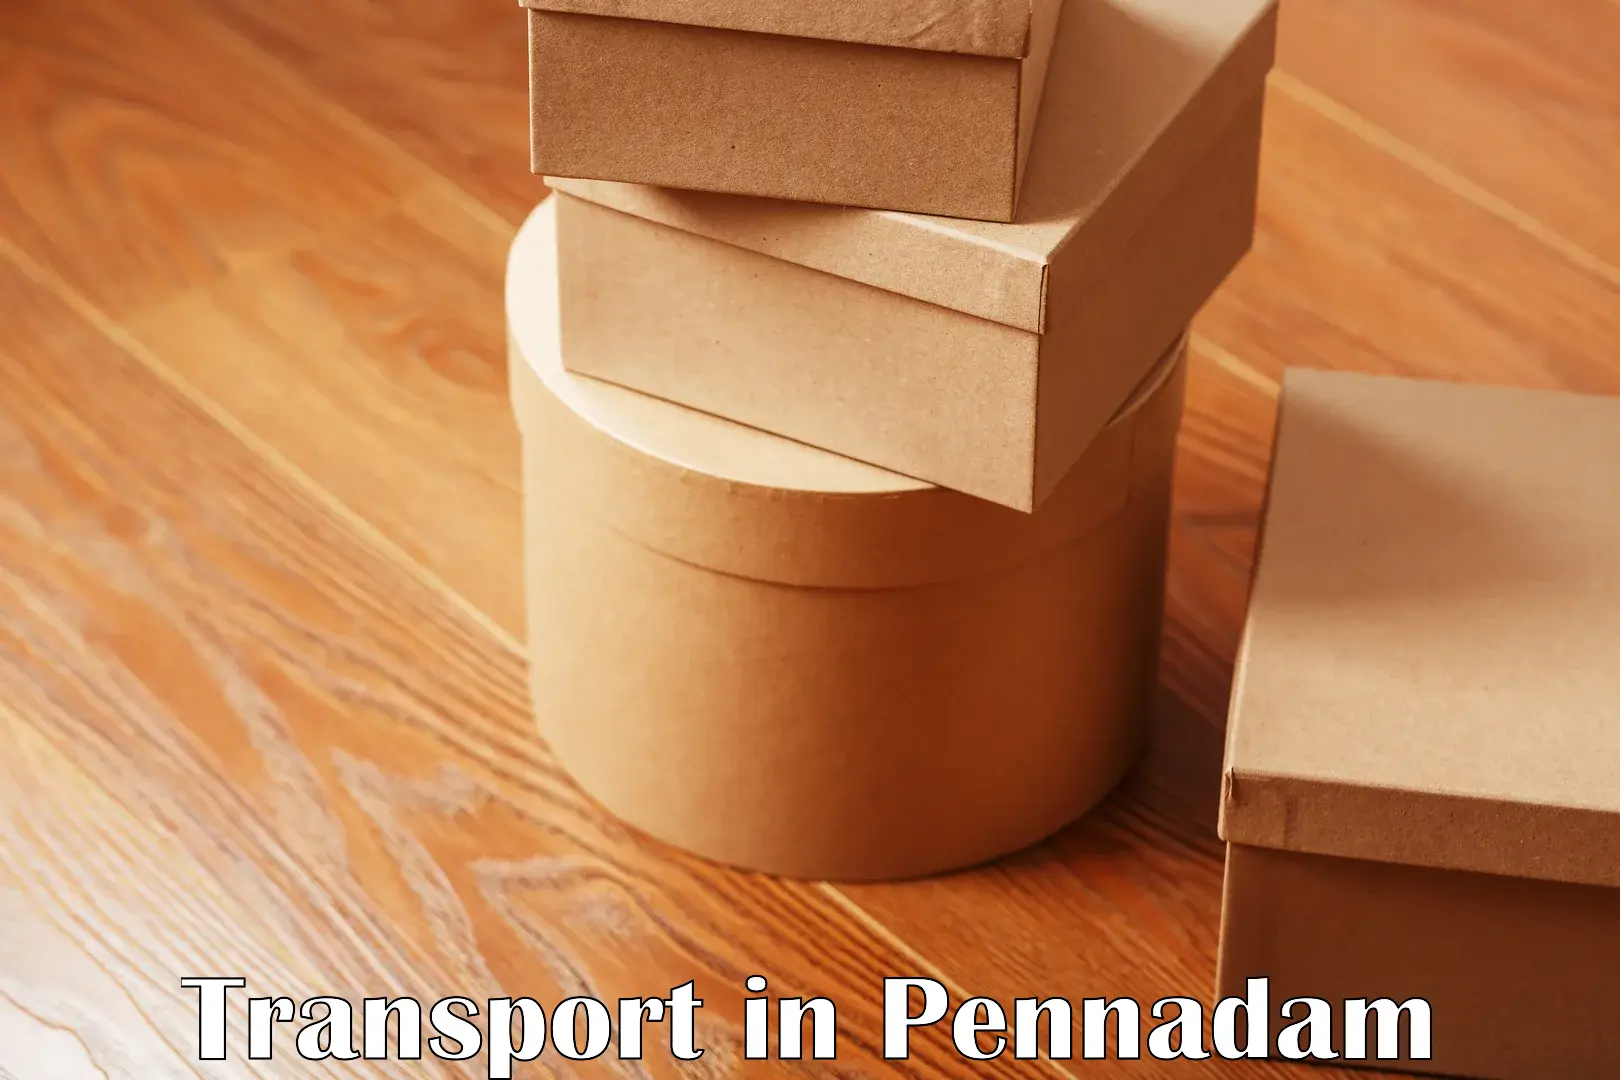 Vehicle transport services in Pennadam